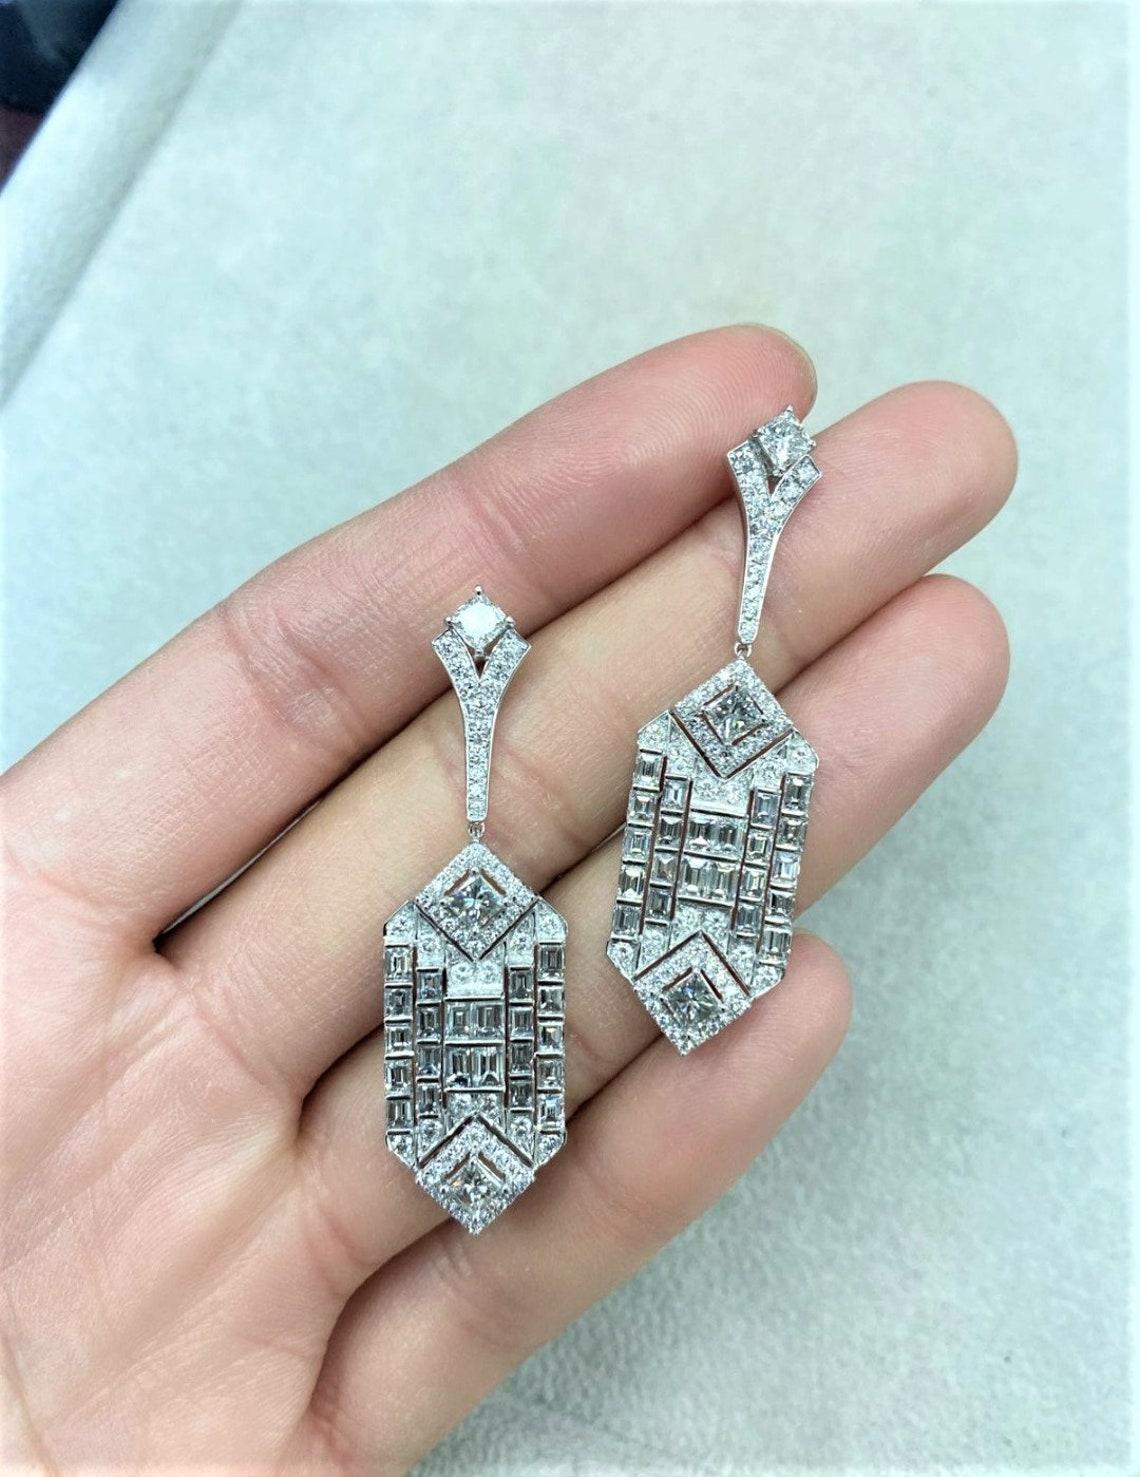 The Following Item we are offering is a Rare Important Radiant Platinum Gold Gorgeous Glittering Deco Style Diamond Earrings. Each Earring Features Spectacular Glittering Fancy Draping Diamonds set in Platinum and 18KT Gold!! Stones are Very Clean